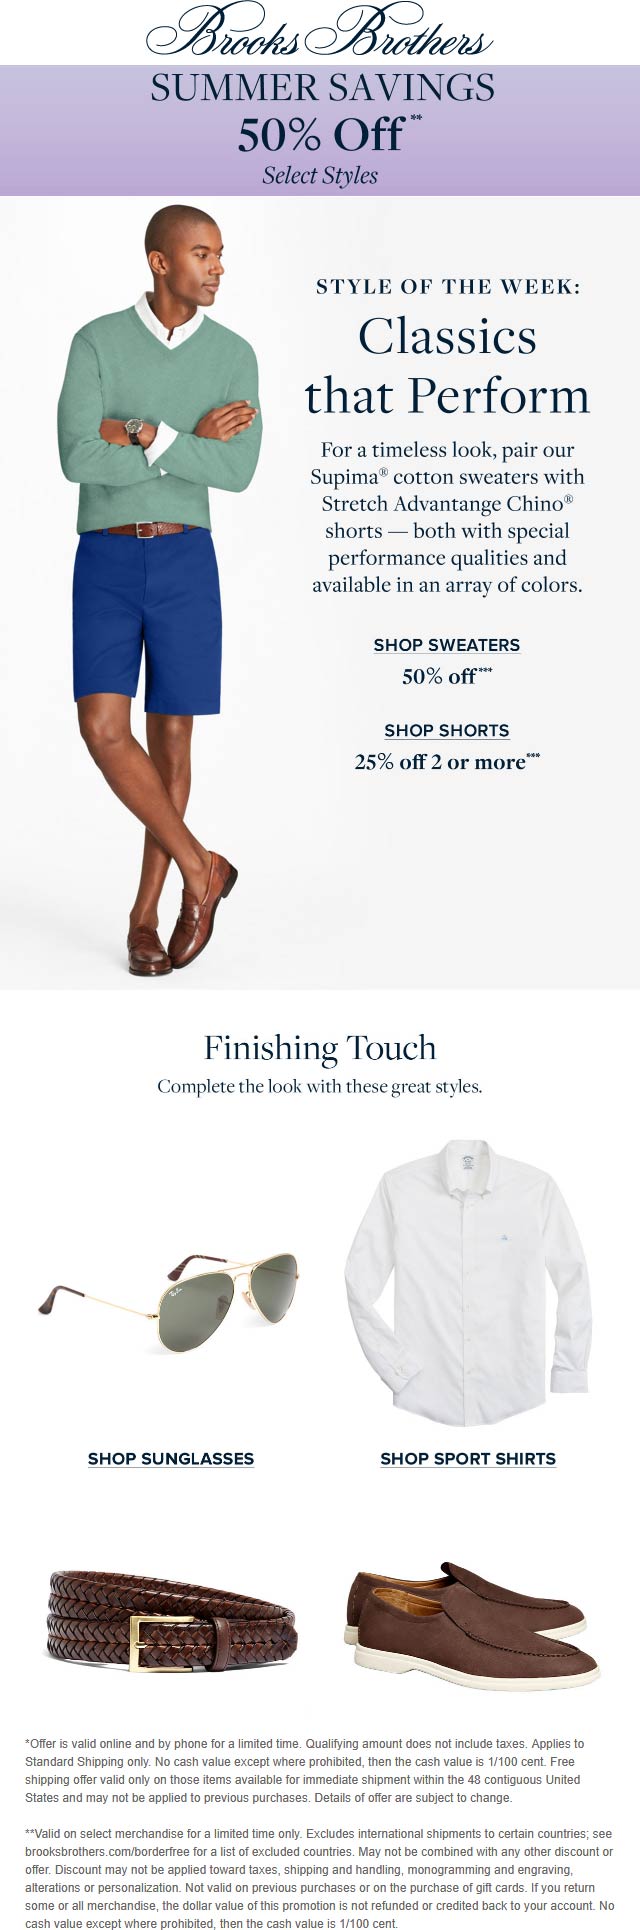 Brooks Brothers stores Coupon  50% off sweaters & more at Brooks Brothers, ditto online #brooksbrothers brooksbrothers preppy ralphlauren 